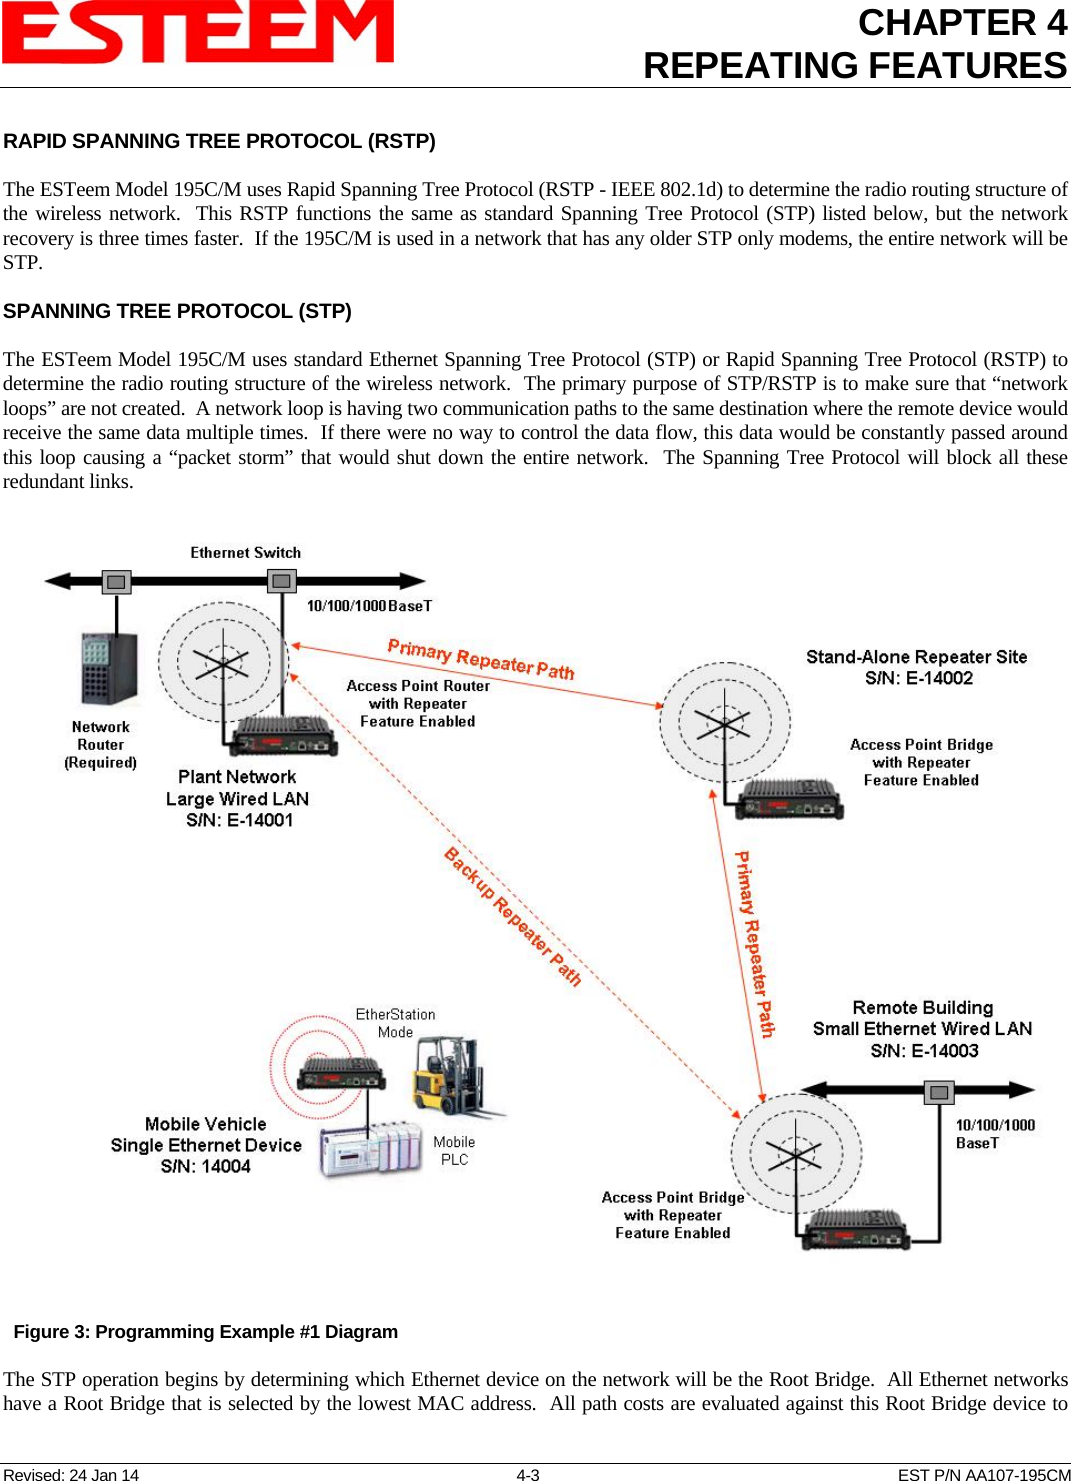 CHAPTER 4REPEATING FEATURES   Revised: 24 Jan 14  4-3  EST P/N AA107-195CM RAPID SPANNING TREE PROTOCOL (RSTP)  The ESTeem Model 195C/M uses Rapid Spanning Tree Protocol (RSTP - IEEE 802.1d) to determine the radio routing structure of the wireless network.  This RSTP functions the same as standard Spanning Tree Protocol (STP) listed below, but the network recovery is three times faster.  If the 195C/M is used in a network that has any older STP only modems, the entire network will be STP.  SPANNING TREE PROTOCOL (STP)  The ESTeem Model 195C/M uses standard Ethernet Spanning Tree Protocol (STP) or Rapid Spanning Tree Protocol (RSTP) to determine the radio routing structure of the wireless network.  The primary purpose of STP/RSTP is to make sure that “network loops” are not created.  A network loop is having two communication paths to the same destination where the remote device would receive the same data multiple times.  If there were no way to control the data flow, this data would be constantly passed around this loop causing a “packet storm” that would shut down the entire network.  The Spanning Tree Protocol will block all these redundant links.      Figure 3: Programming Example #1 Diagram The STP operation begins by determining which Ethernet device on the network will be the Root Bridge.  All Ethernet networks have a Root Bridge that is selected by the lowest MAC address.  All path costs are evaluated against this Root Bridge device to 